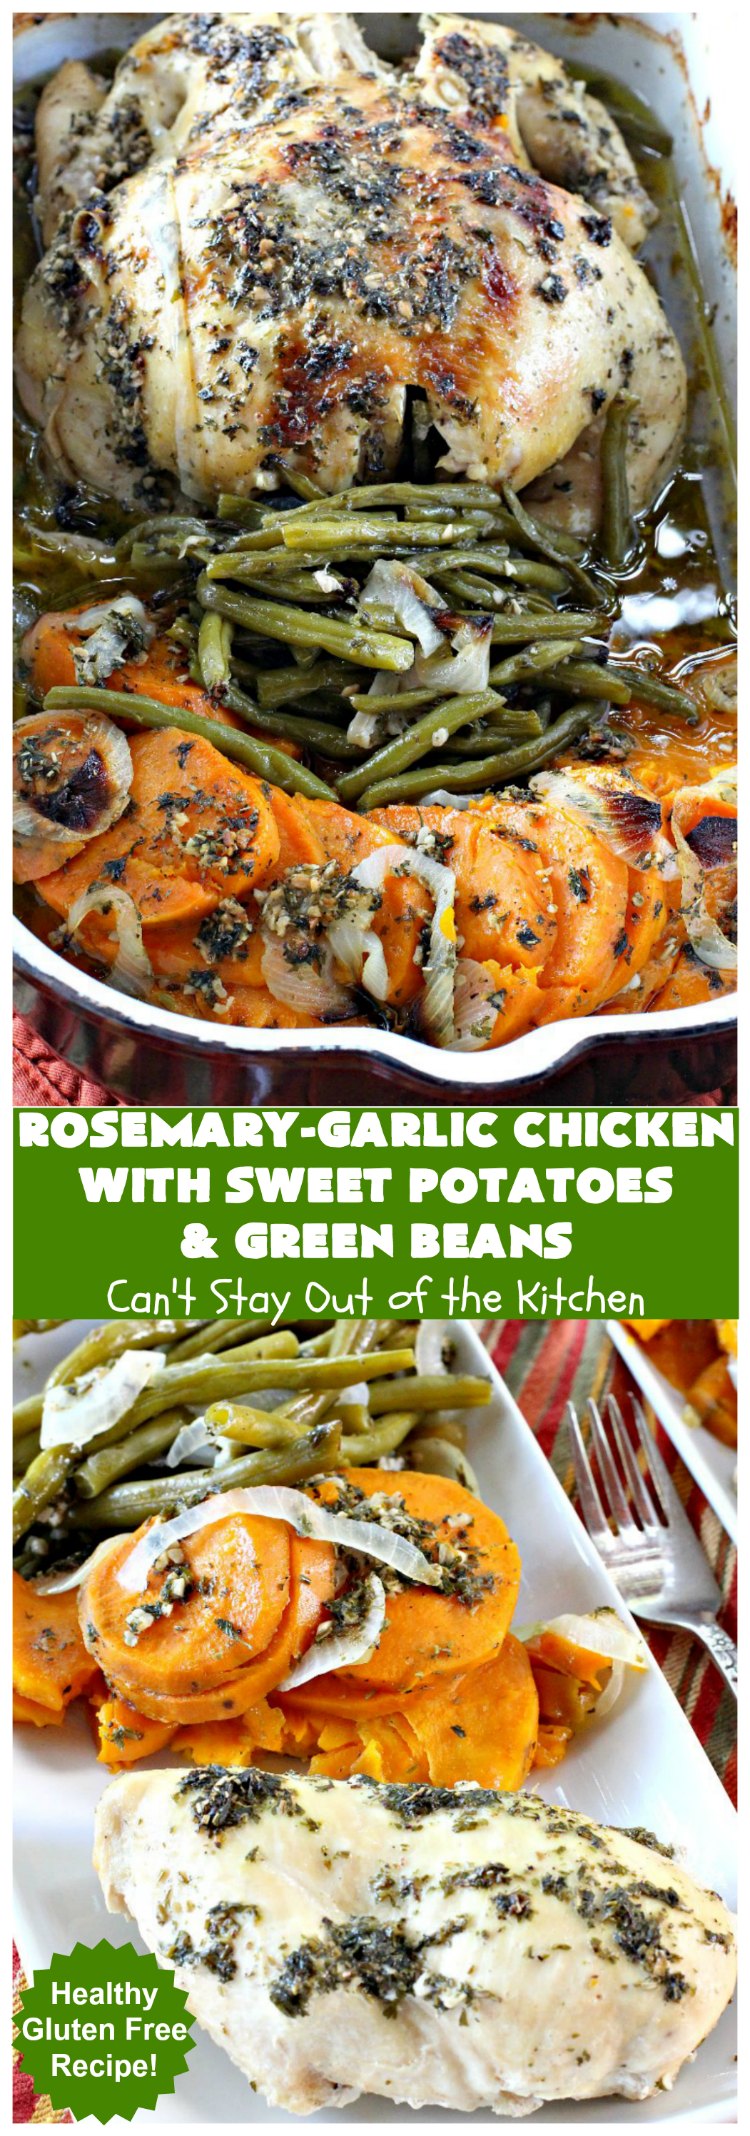 Rosemary-Garlic Chicken with Sweet Potatoes and Green Beans | Can't Stay Out of the Kitchen | this awesome one-dish meal has one of the best sauces coating the #chicken & veggies ever! This easy entree is  succulent, irresistible & absolutely mouthwatering & great for company or family dinners. #healthy #GlutenFree #SweetPotatoes #GreenBeans #RosemaryGarlicChickenWithSweetPotatoesAndGreenBeans